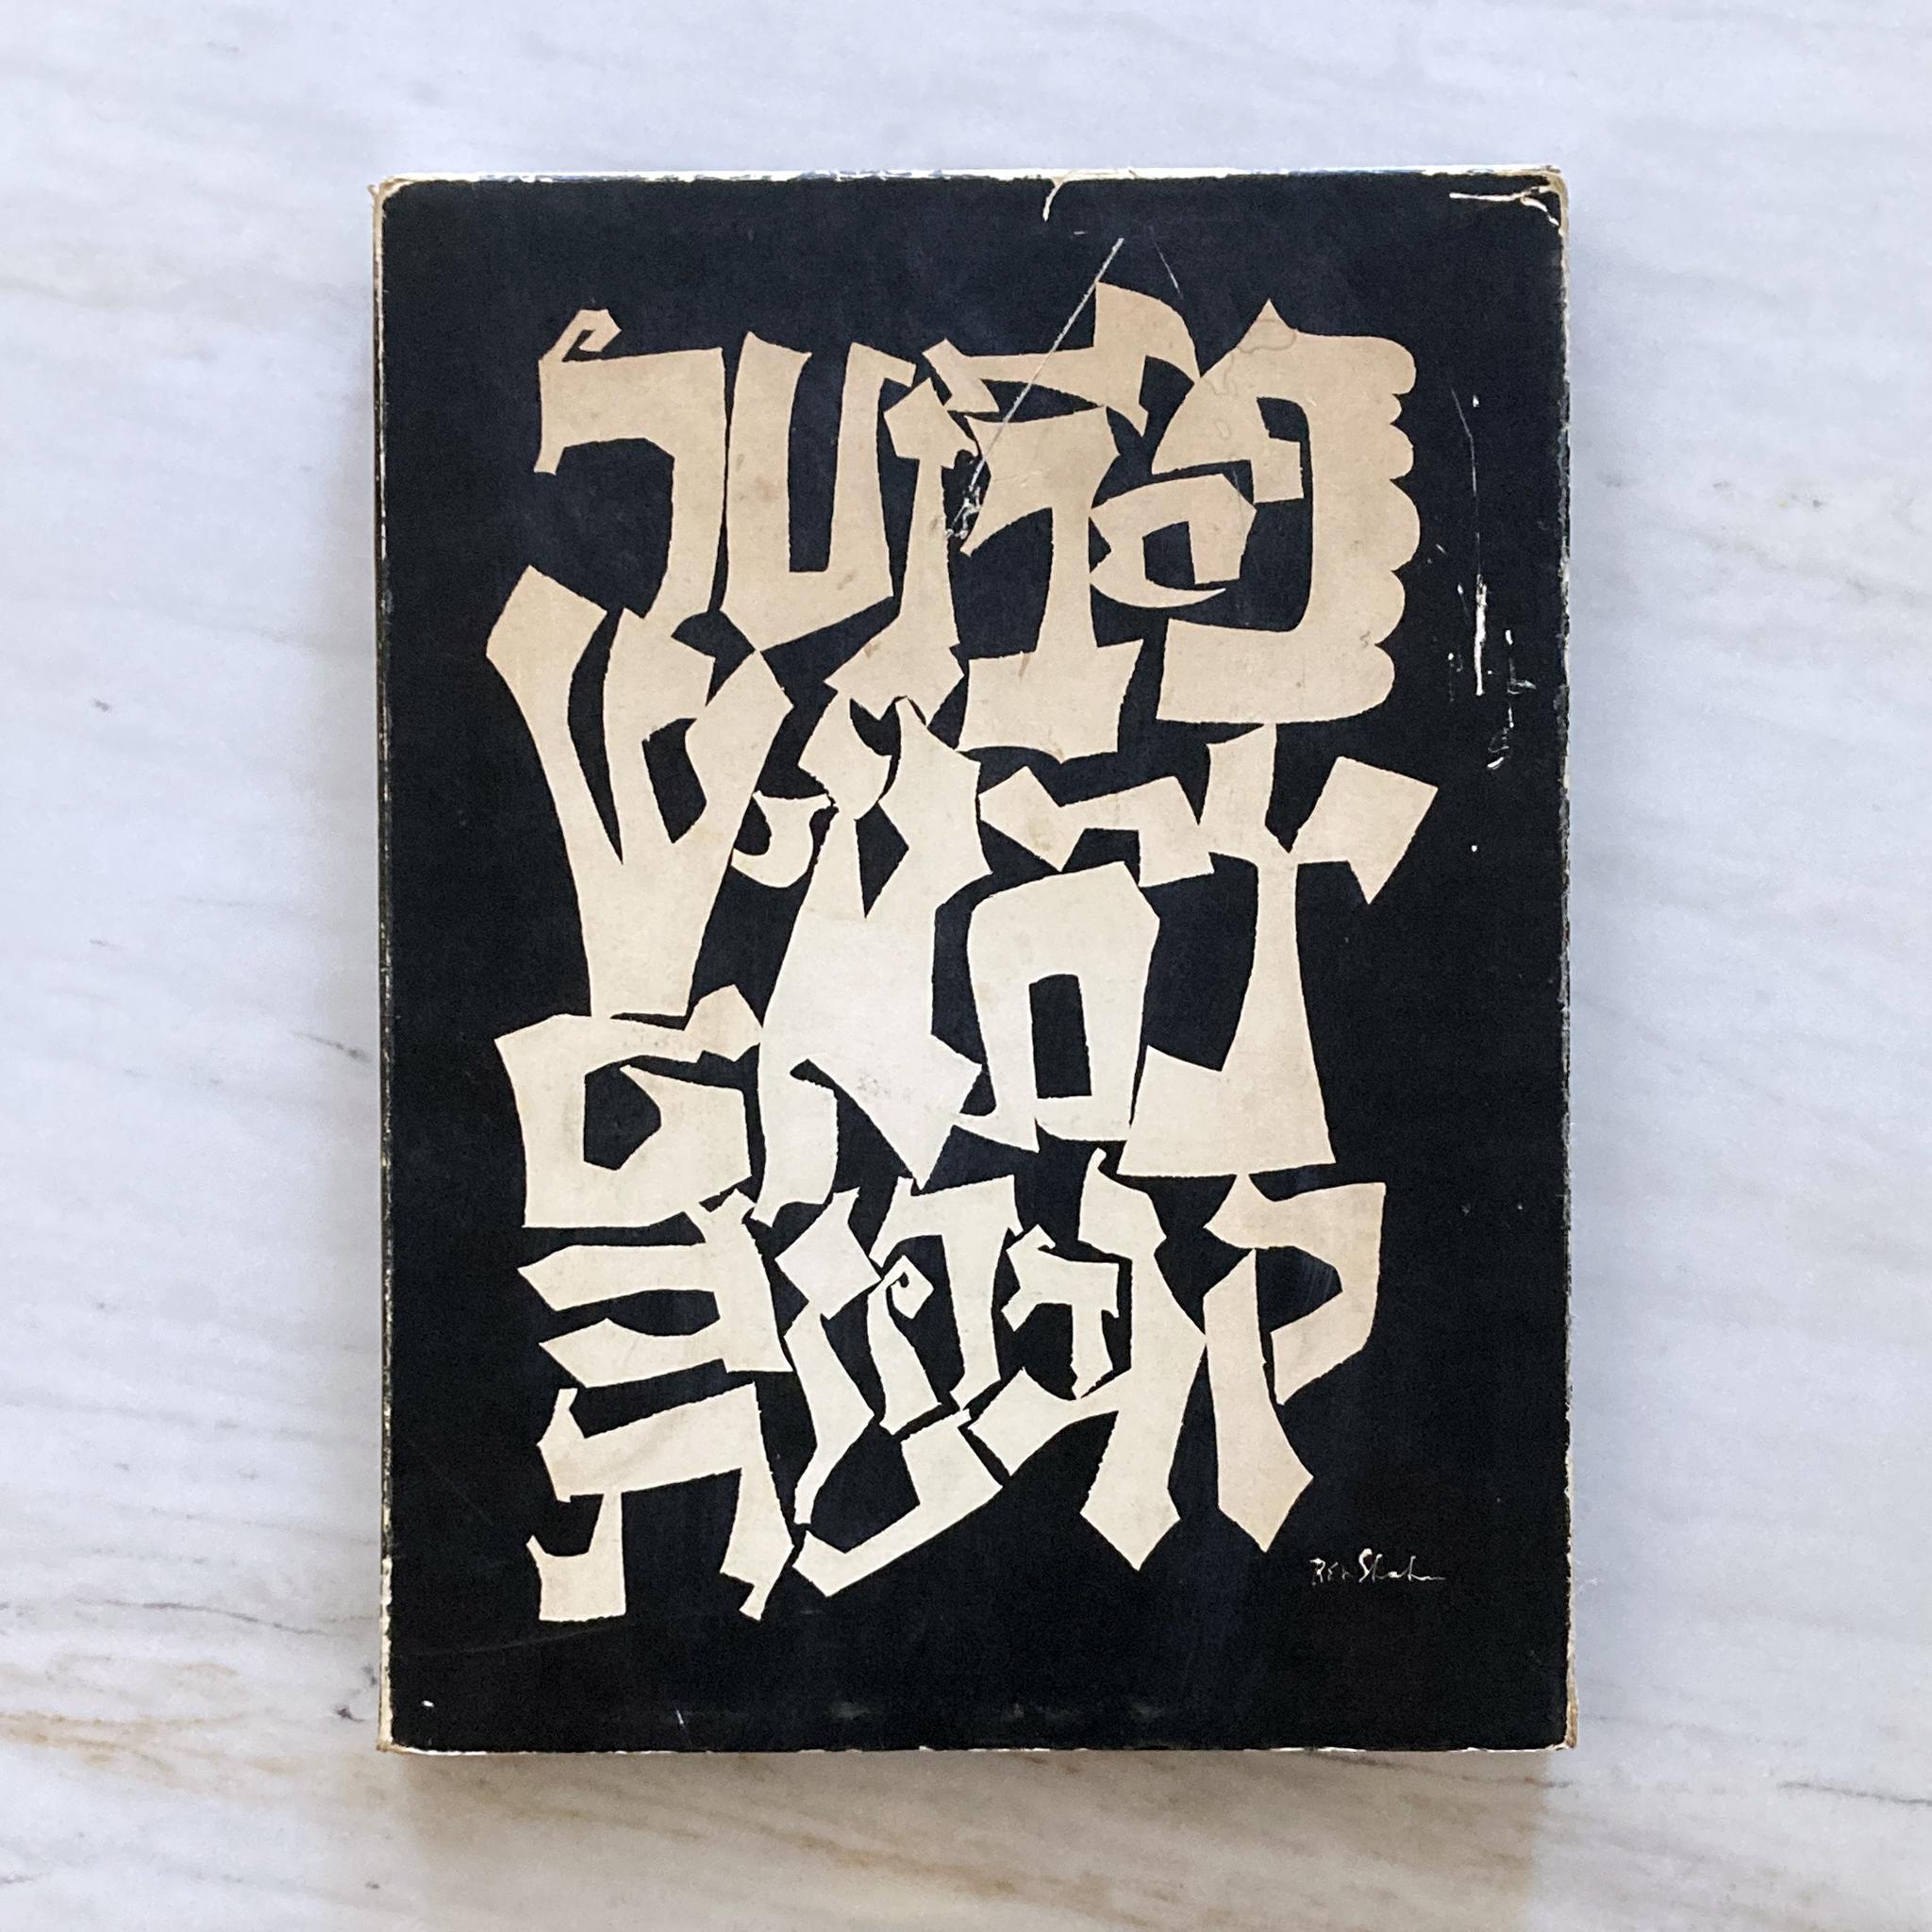 Ben Shahn, Love and Joy About Letters, 1963 1st Edition, Grossman Publishers. Love and Joy About Letters is a testament to Ben Shahn’s love affair with letters: the beauty of the letter forms, the liberating influence hand-lettering, and how the